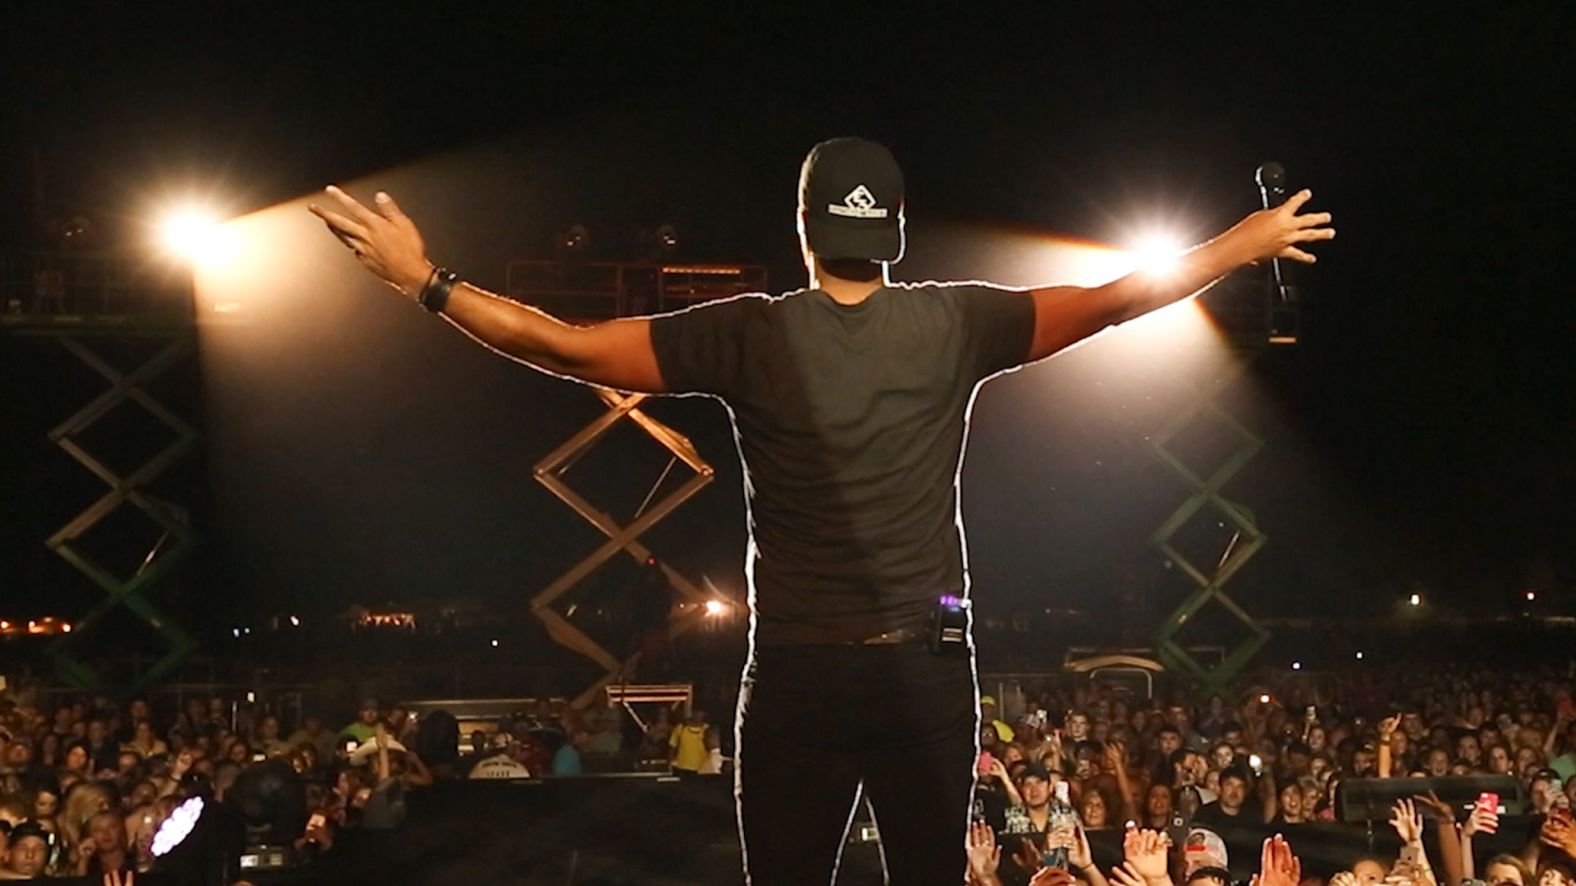 <strong>"Luke Bryan: My Dirt Road Diary"</strong>: This five-part docuseries follows five-time Entertainer of the Year Luke Bryan as he experiences the ups, downs, triumphs, and tragedies along the road to unprecedented success. <strong>(IMDB TV)</strong>